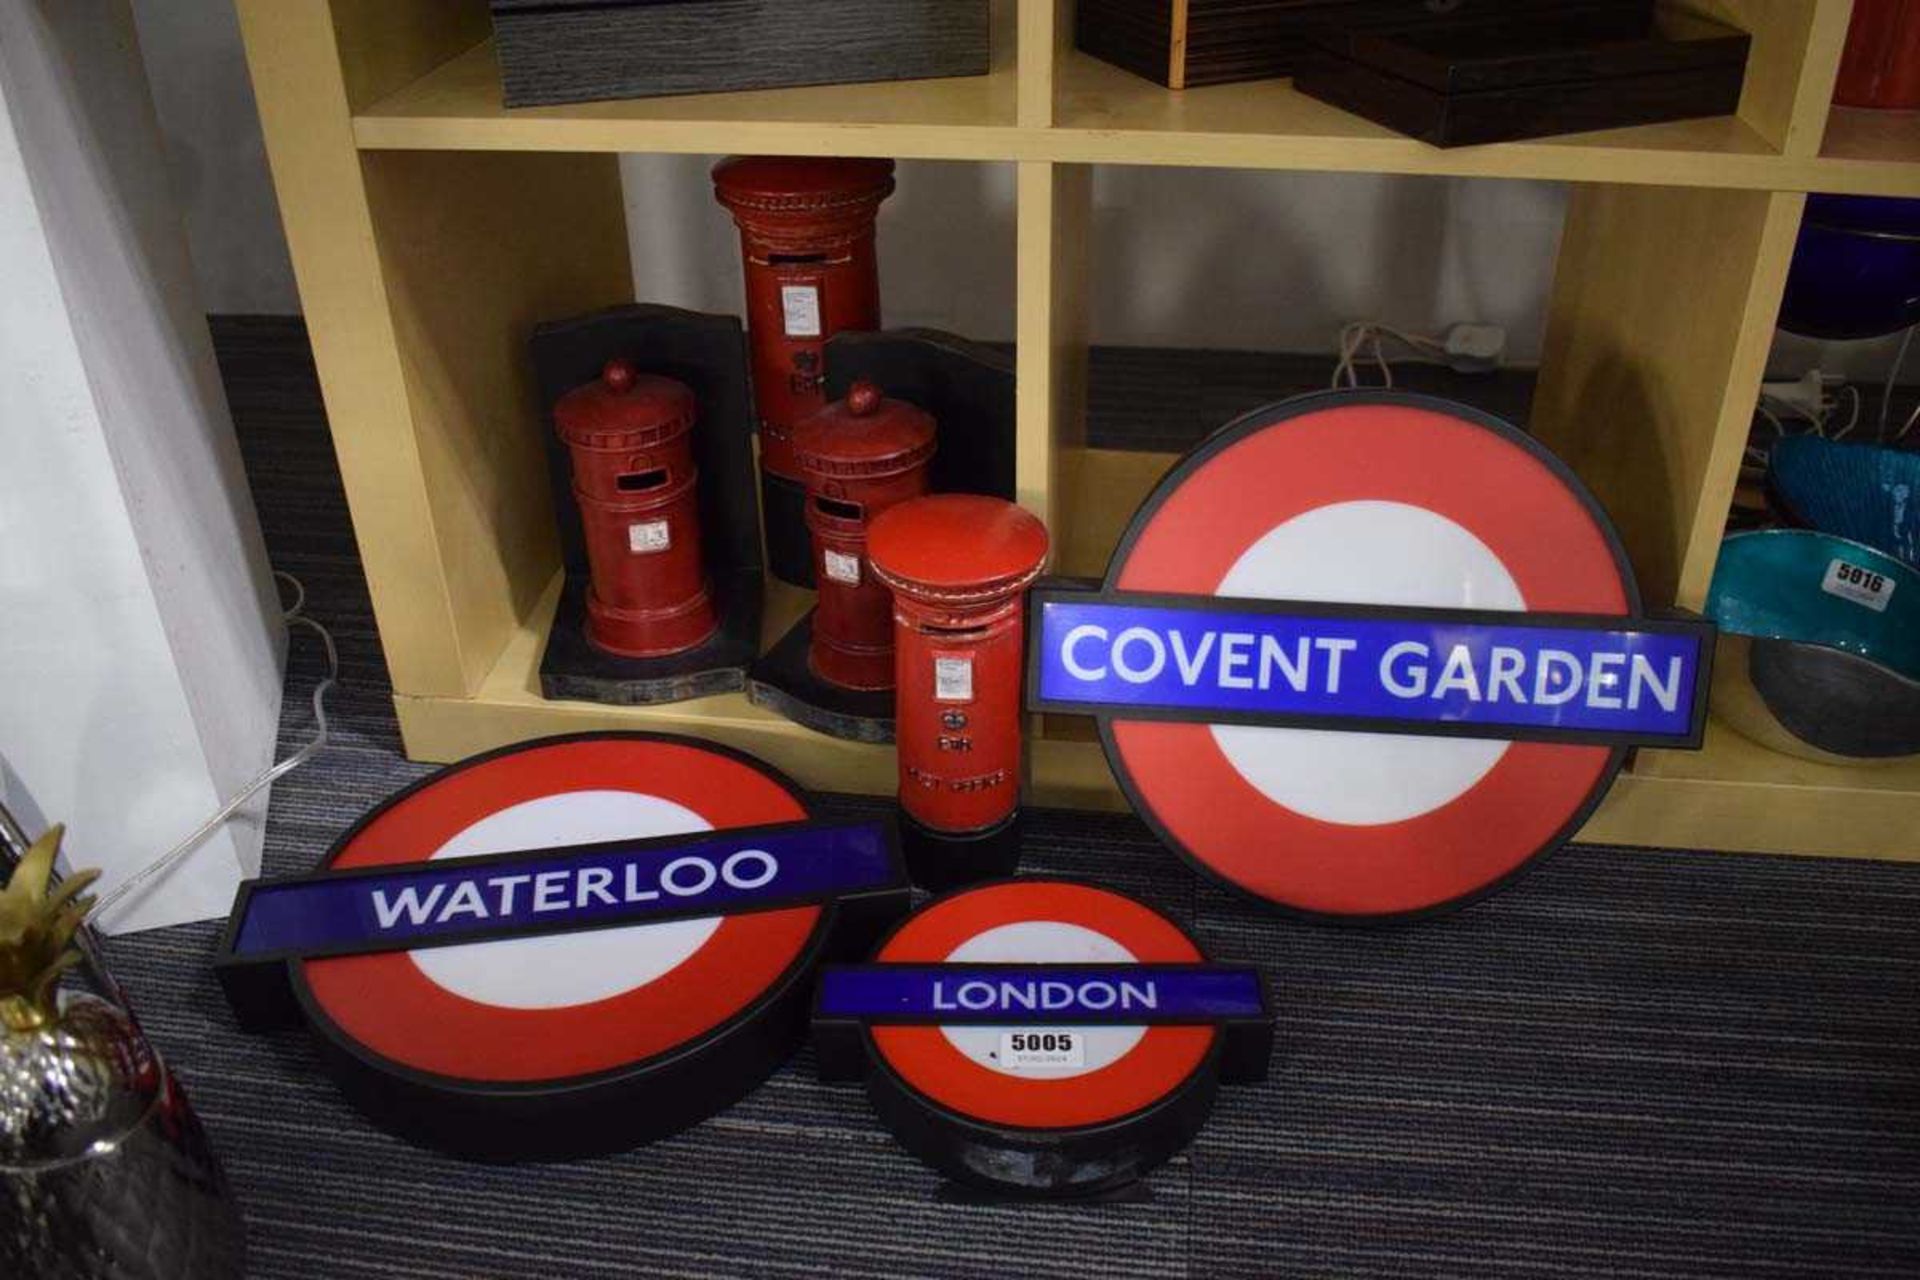 Three reproduction London Underground signs together with post box bookends and ornaments